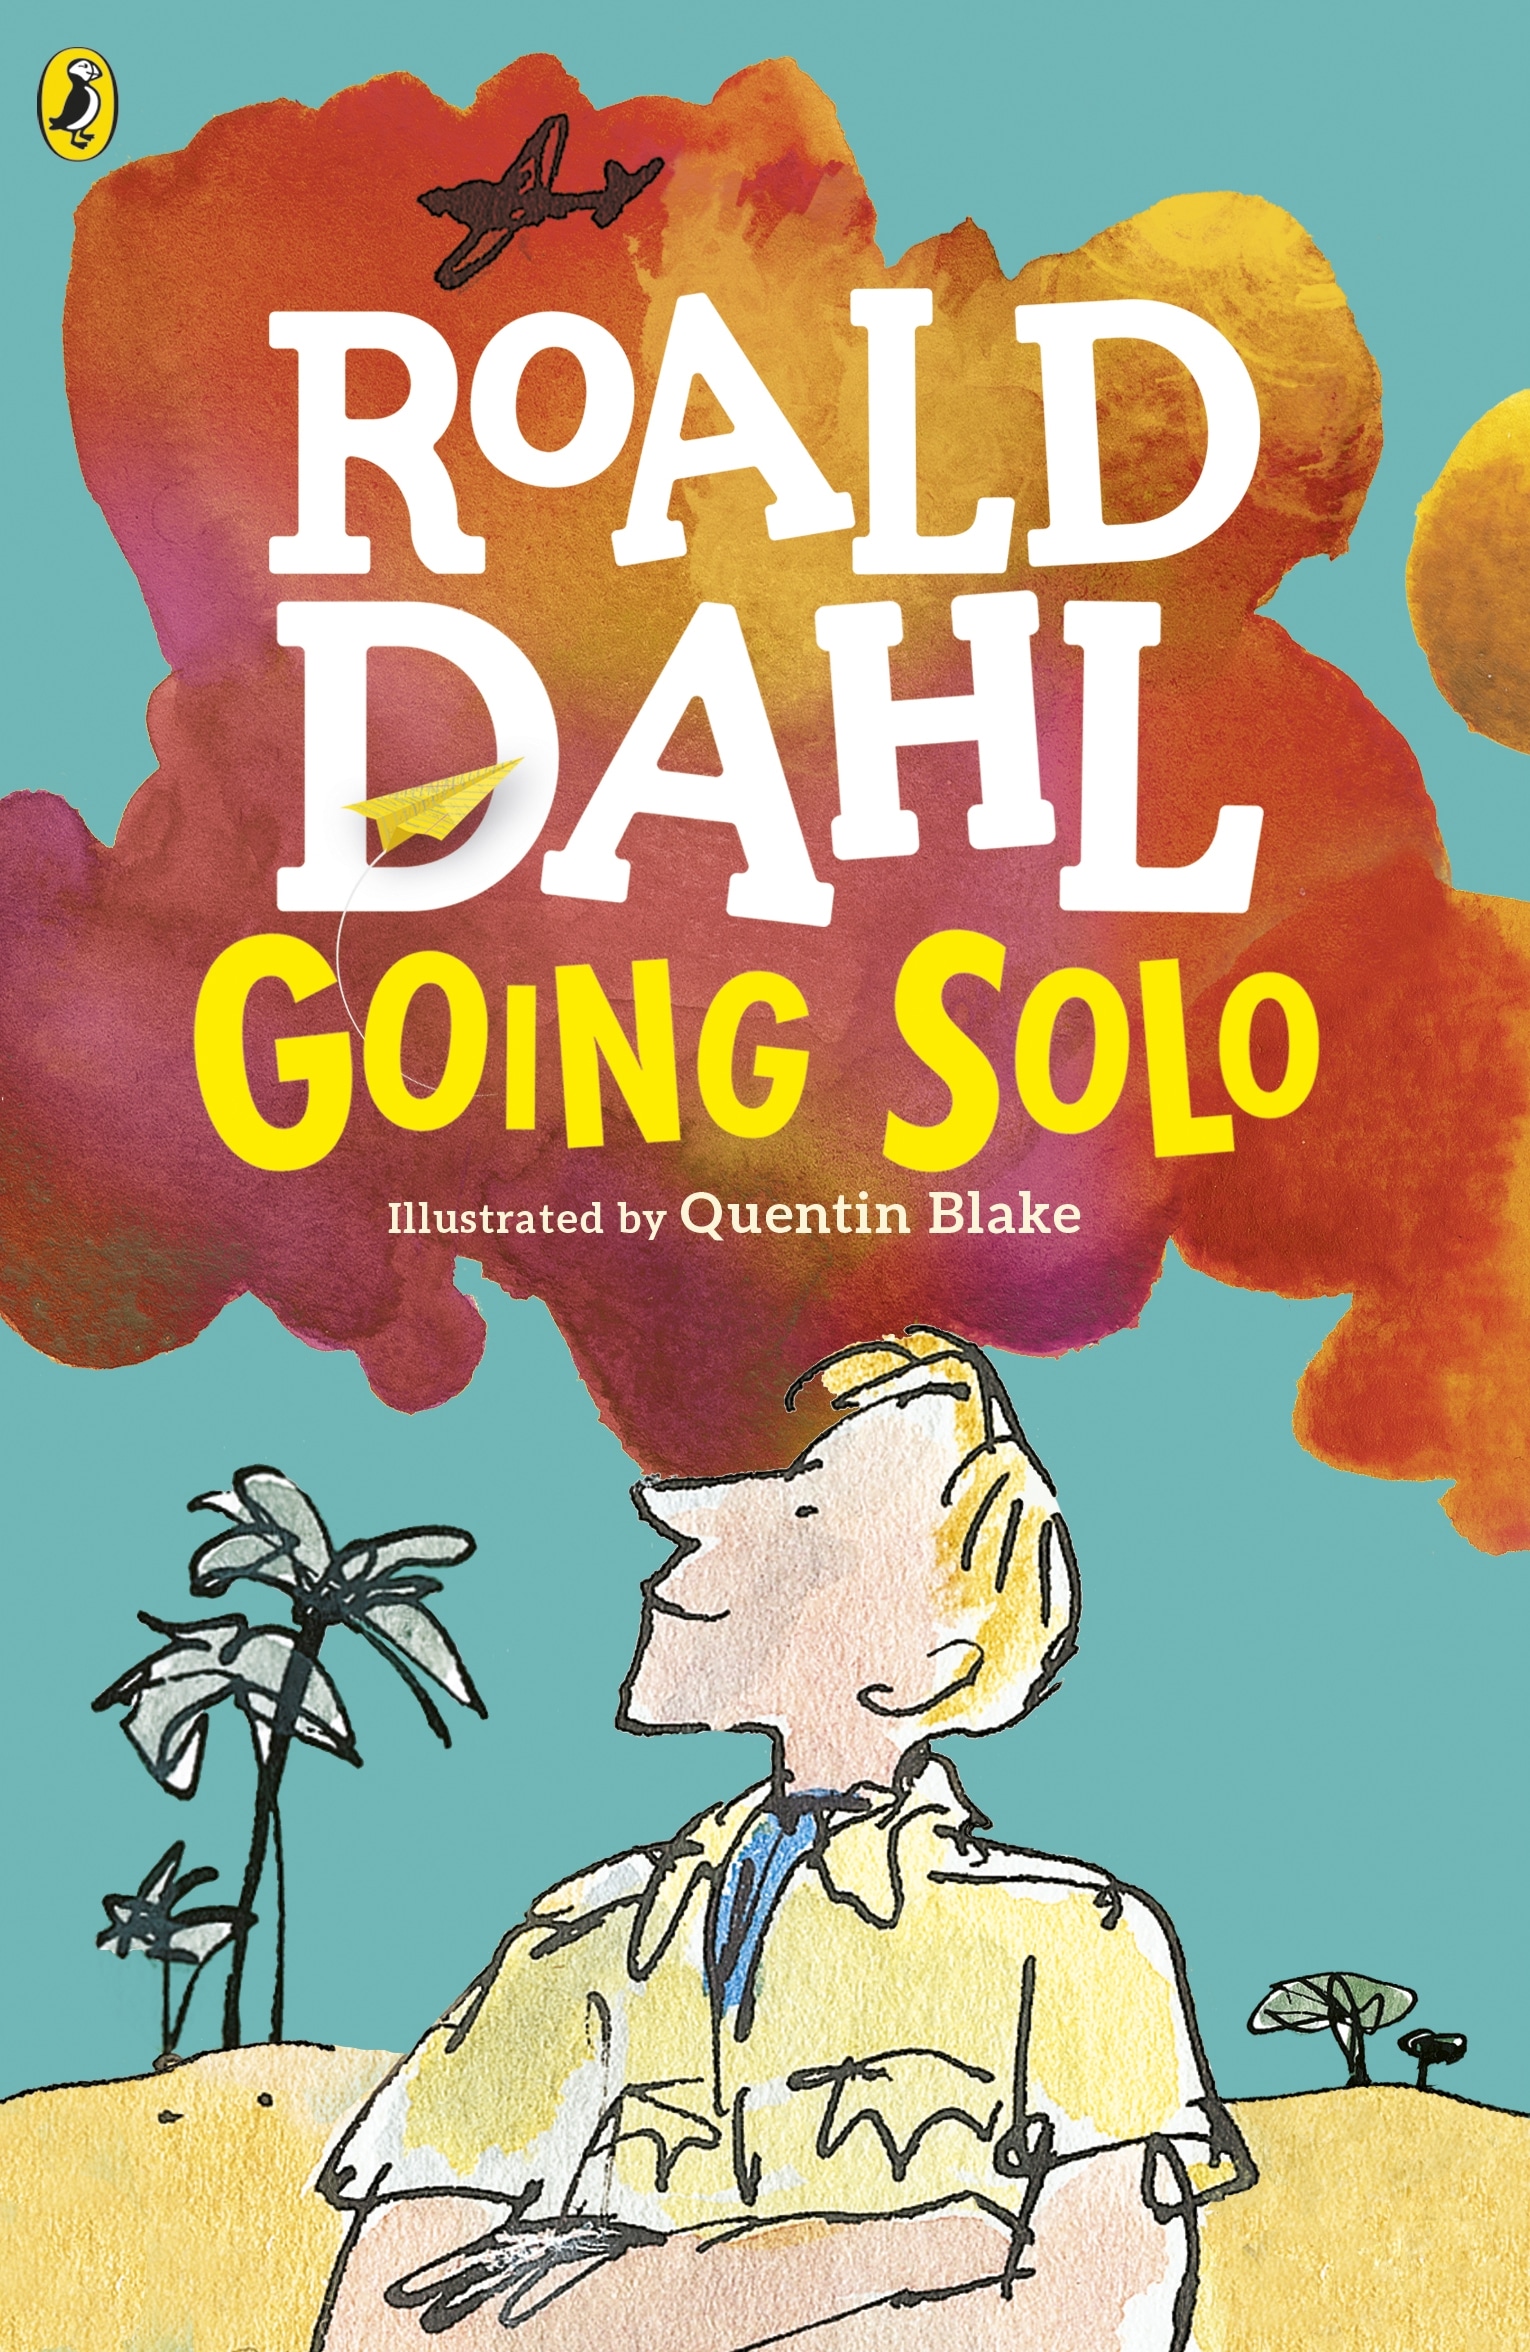 Book “Going Solo” by Roald Dahl — February 11, 2016